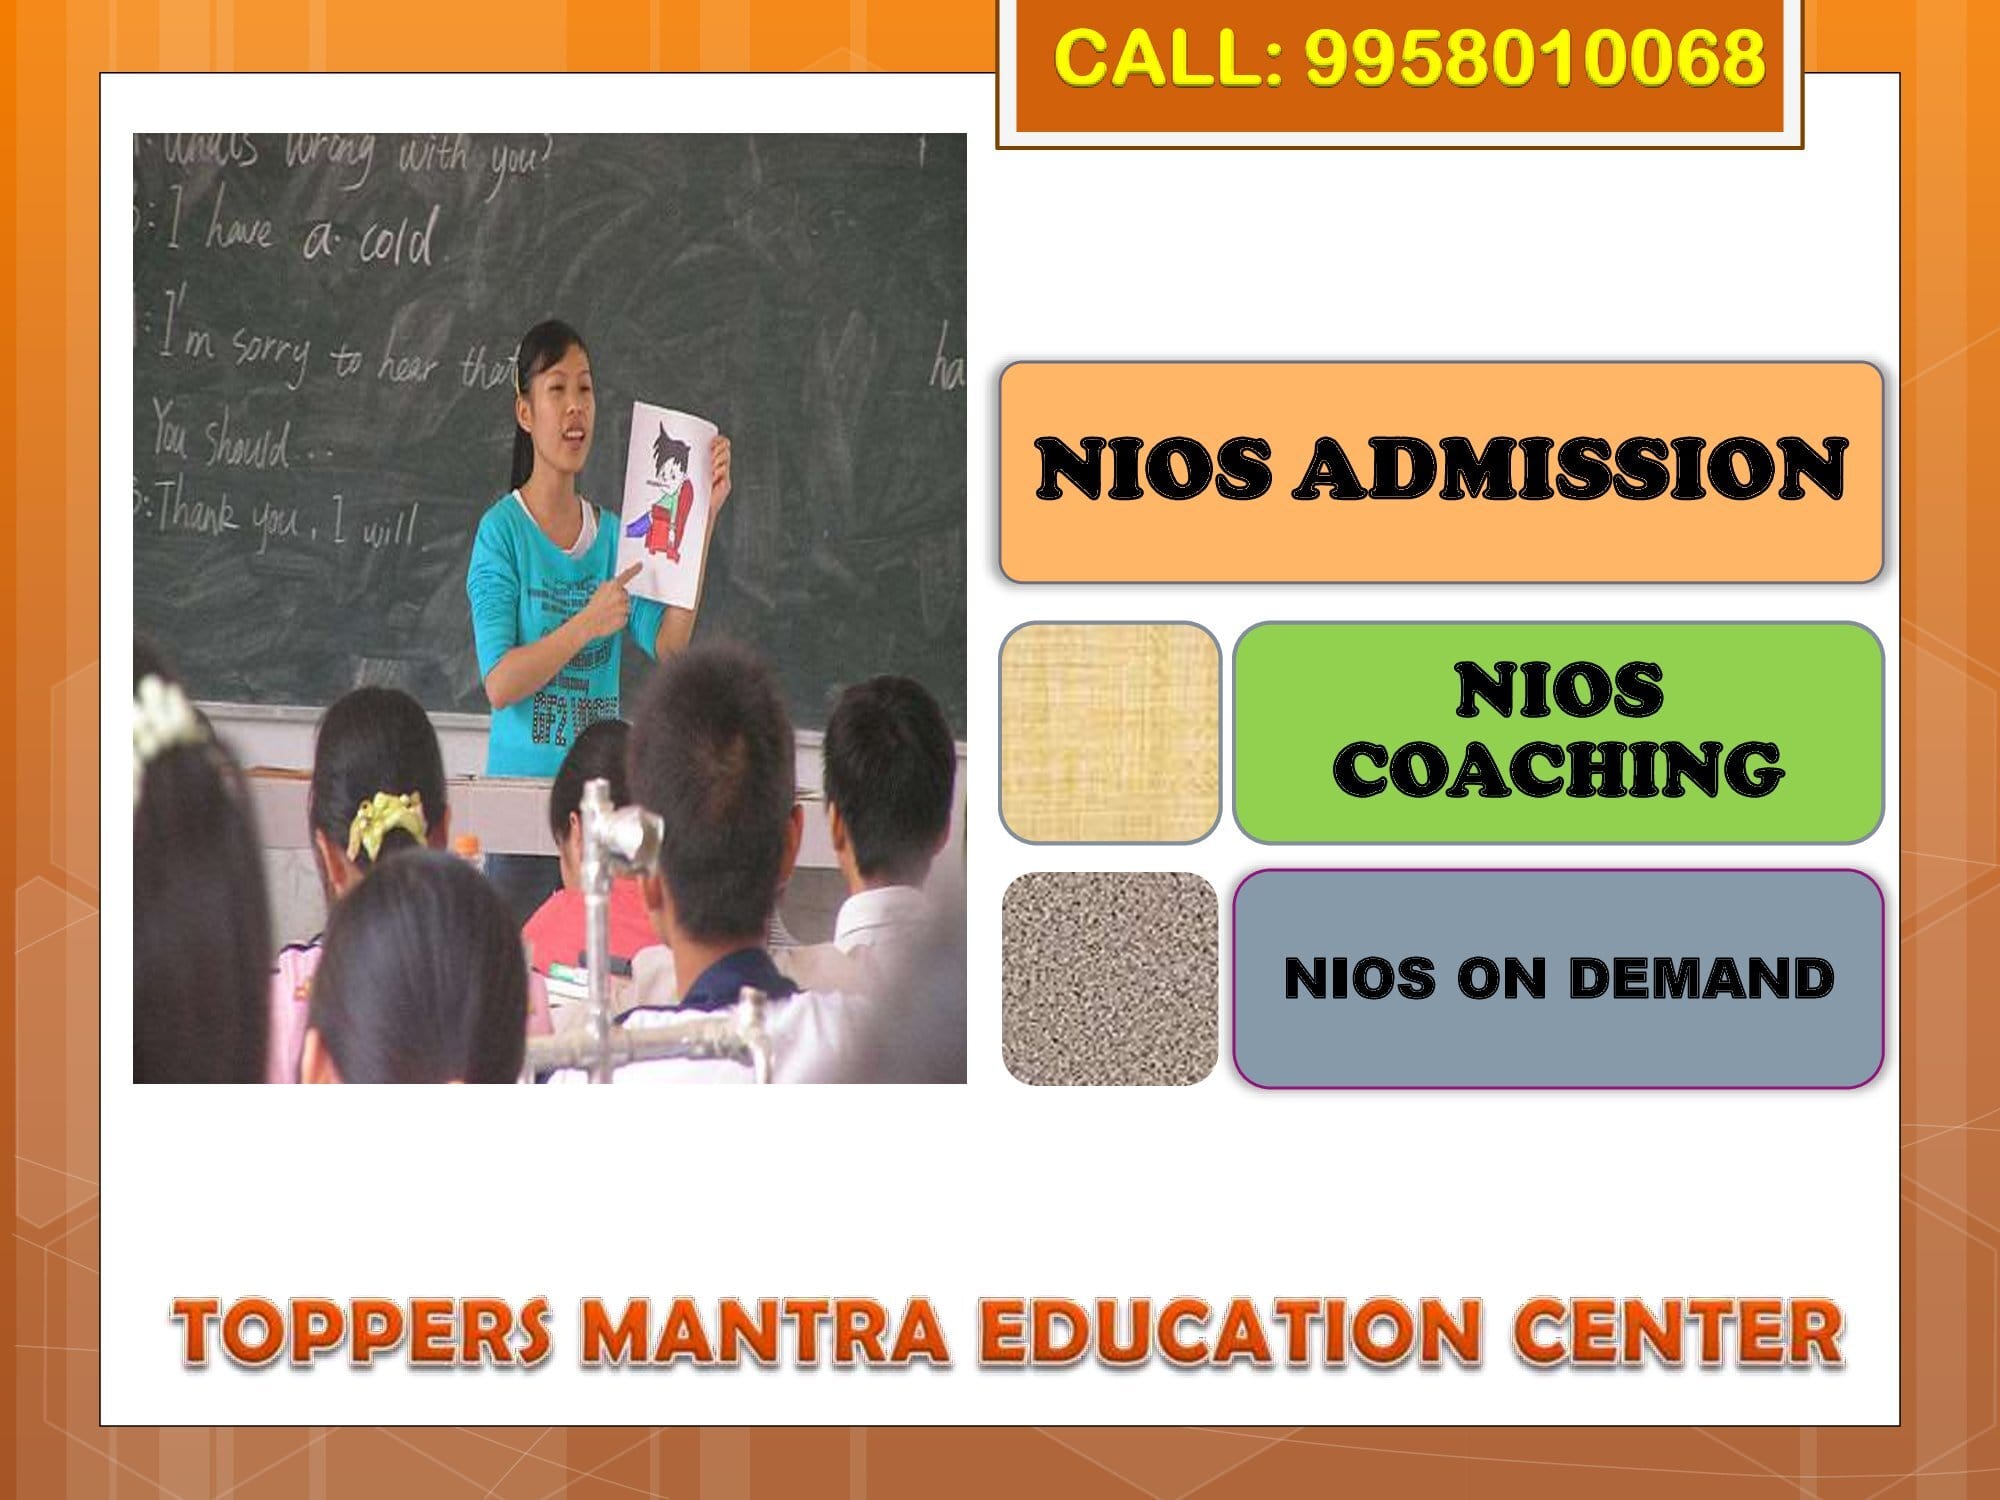 nios-admission-toppers-mantra